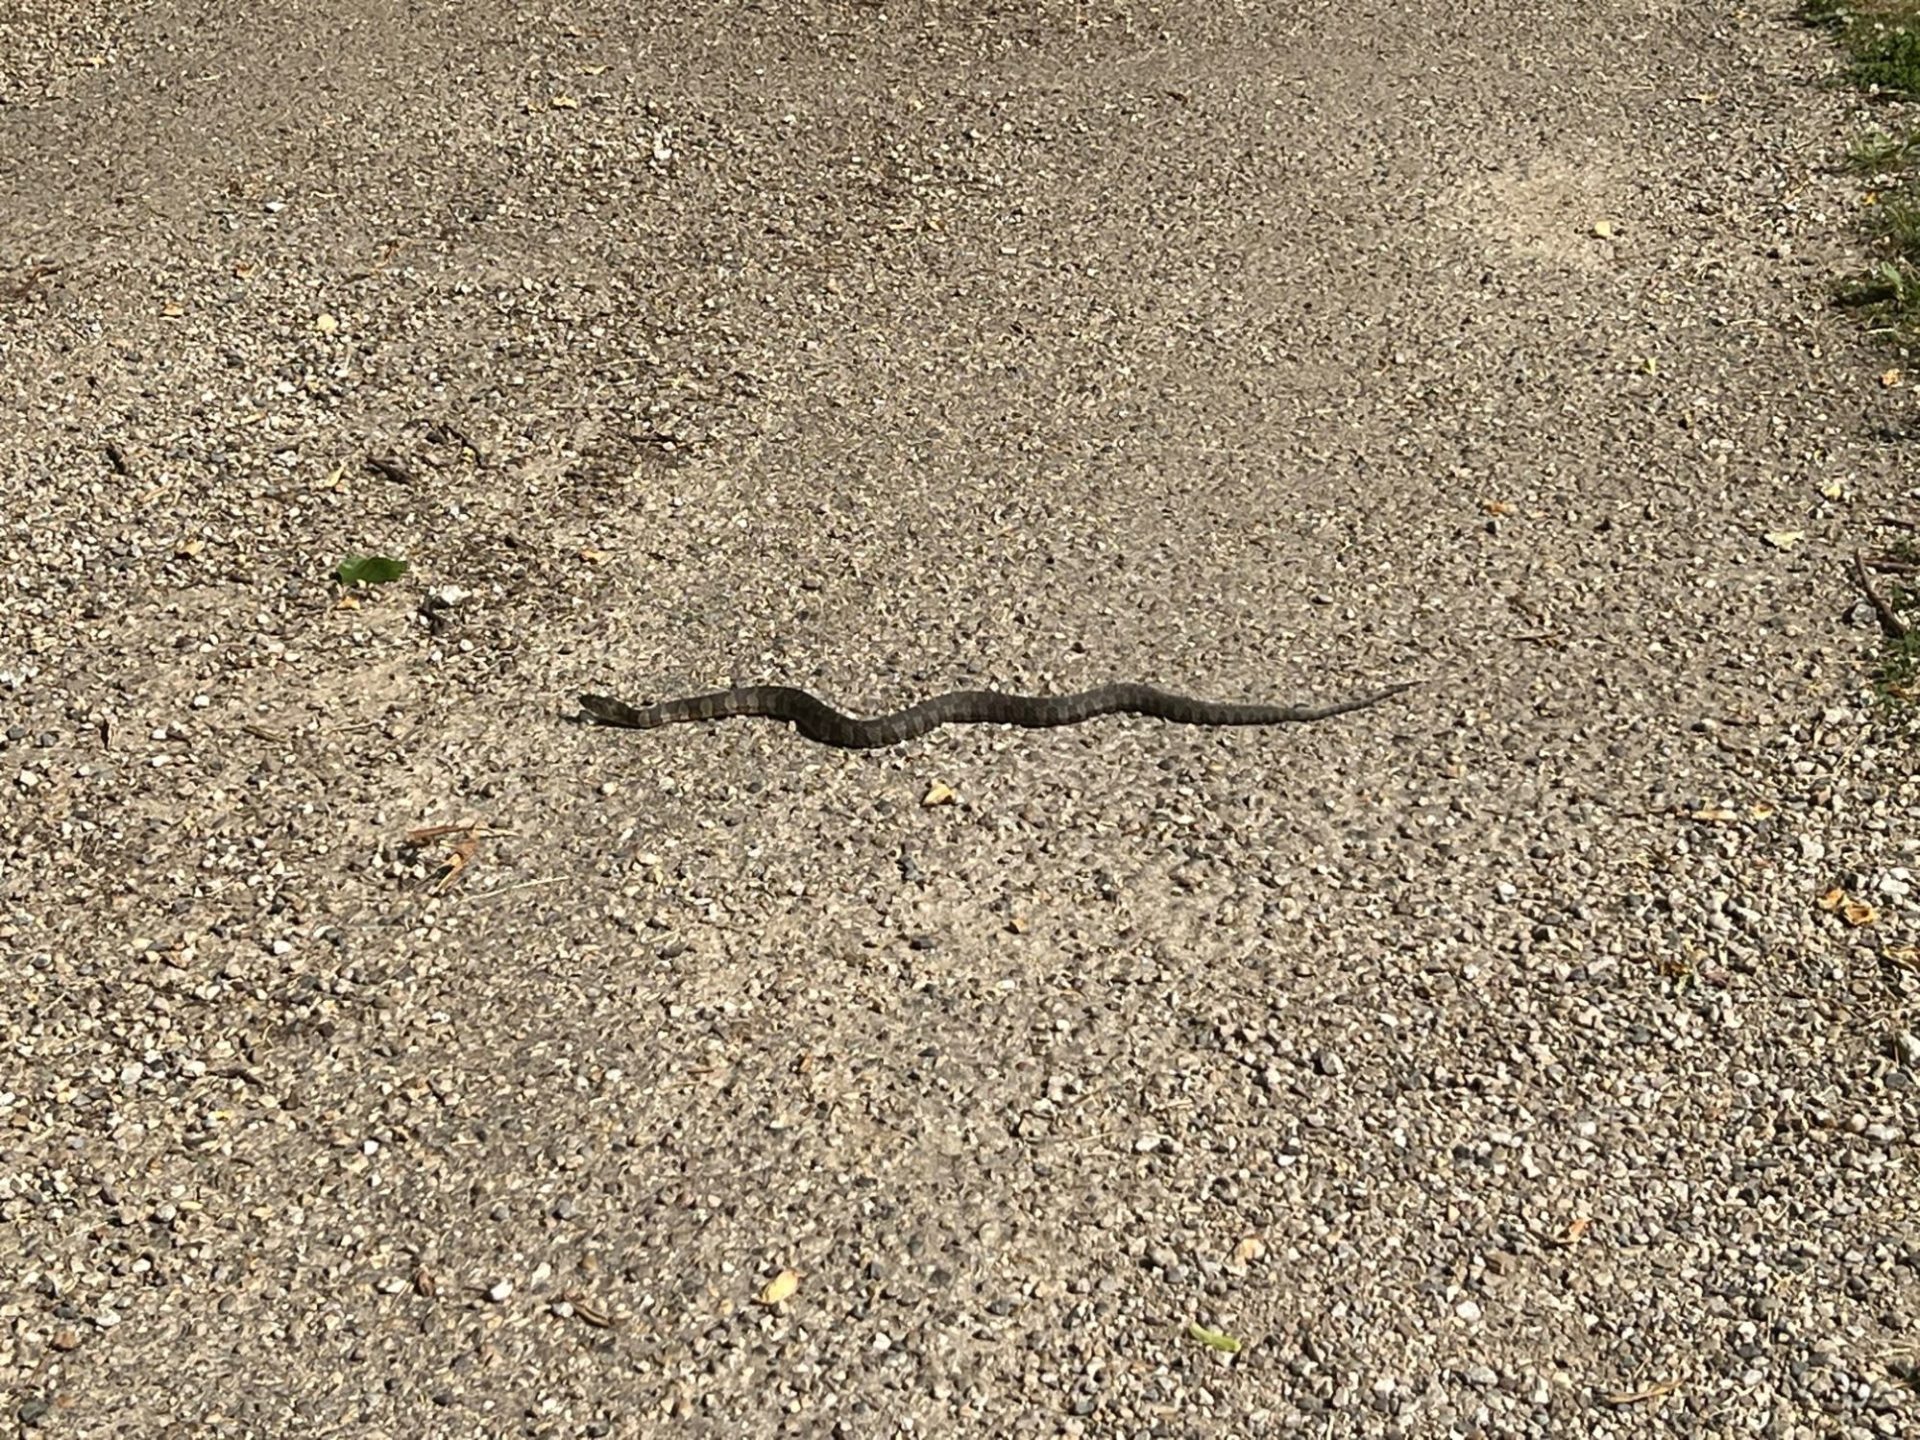 Close up of a small brown snake on a paved path.